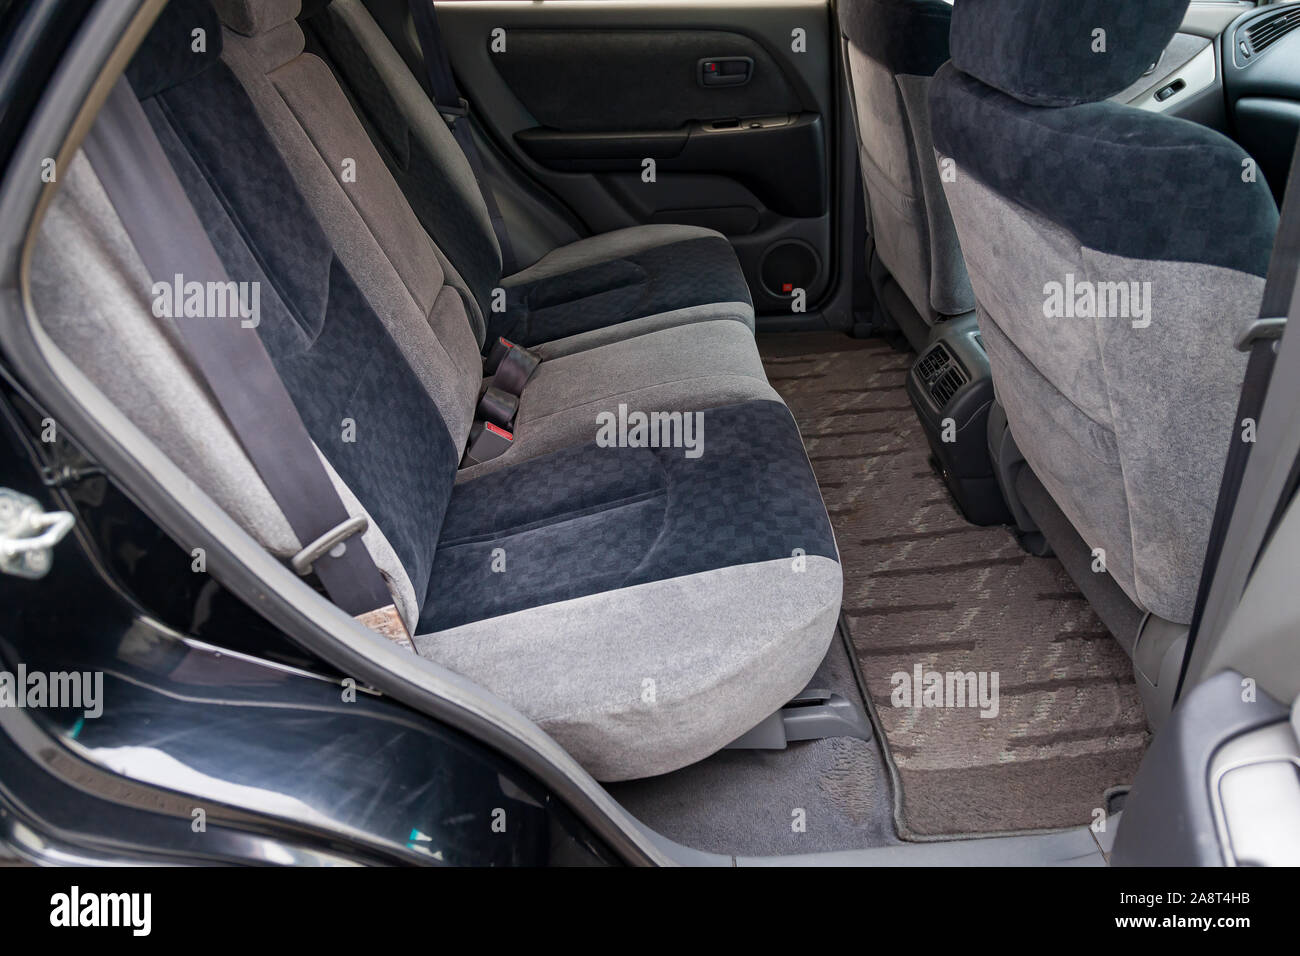 Novosibirsk, Russia - 11.05.2019: View to the gray interior of Toyota Harrier or Lexus RX300 with dashboard, clock, media system, rear seats and shift Stock Photo